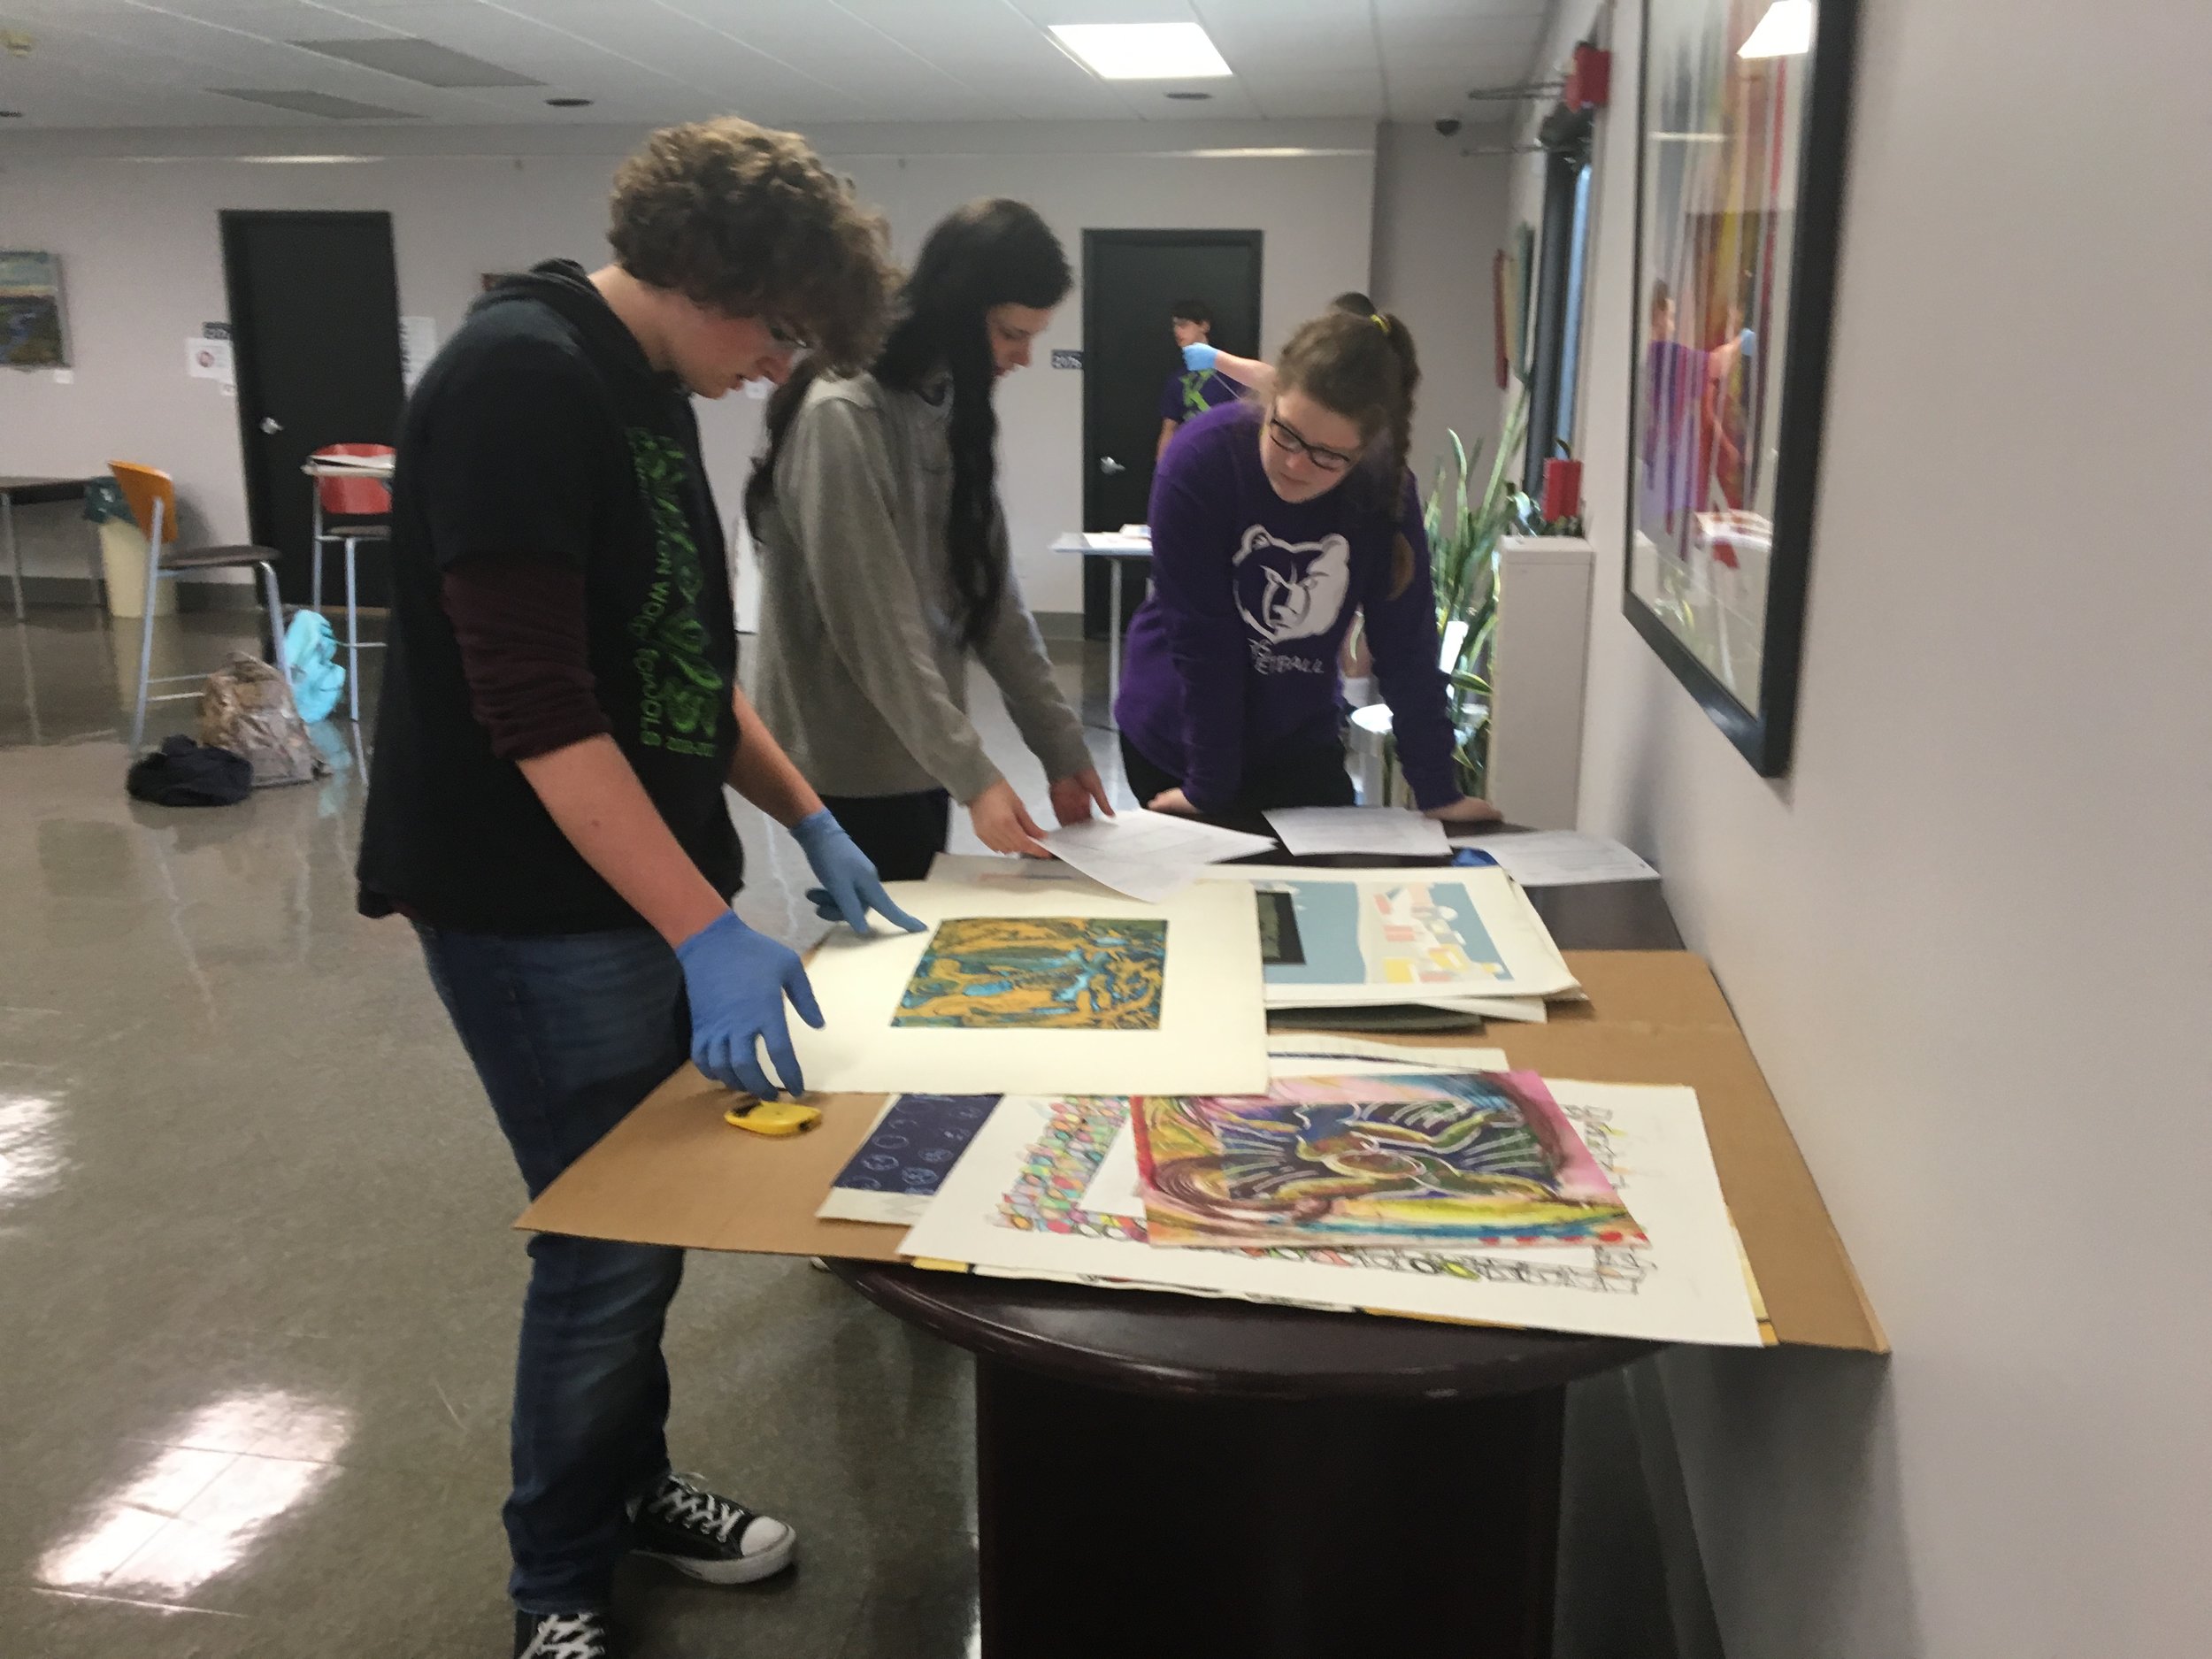 group of students sorting artwork to display